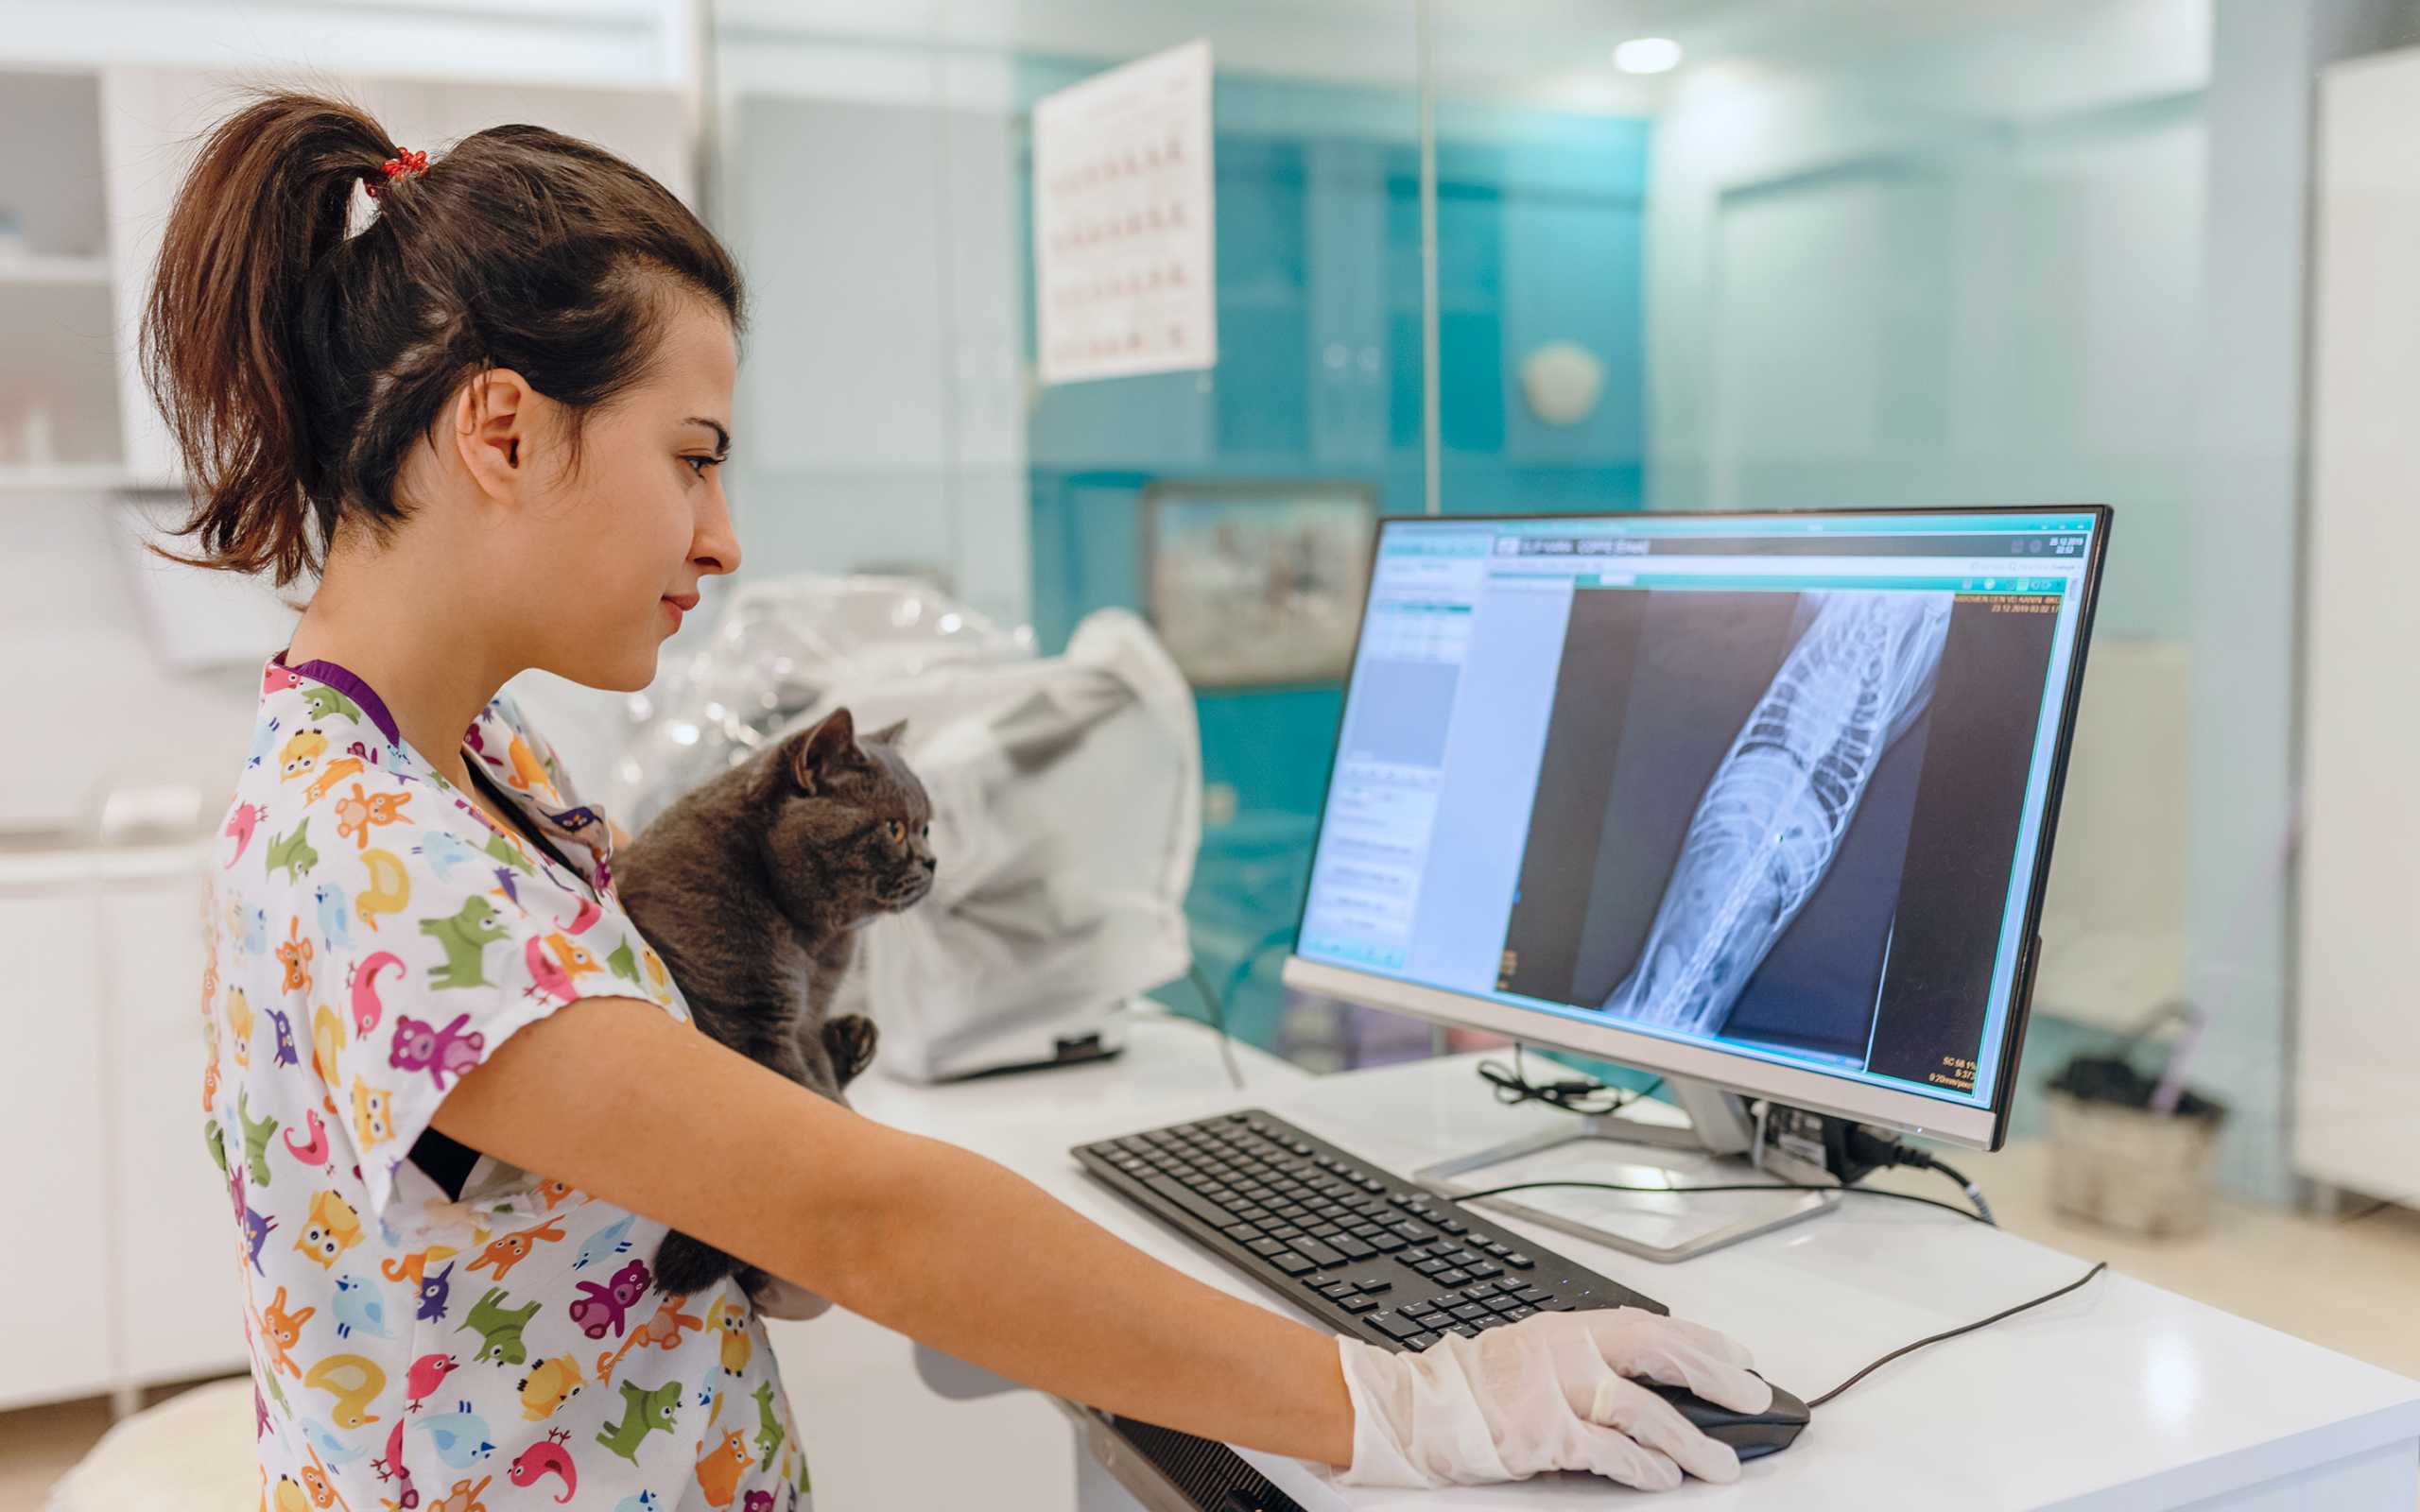 Vet holding cat and looking at screen with patient records